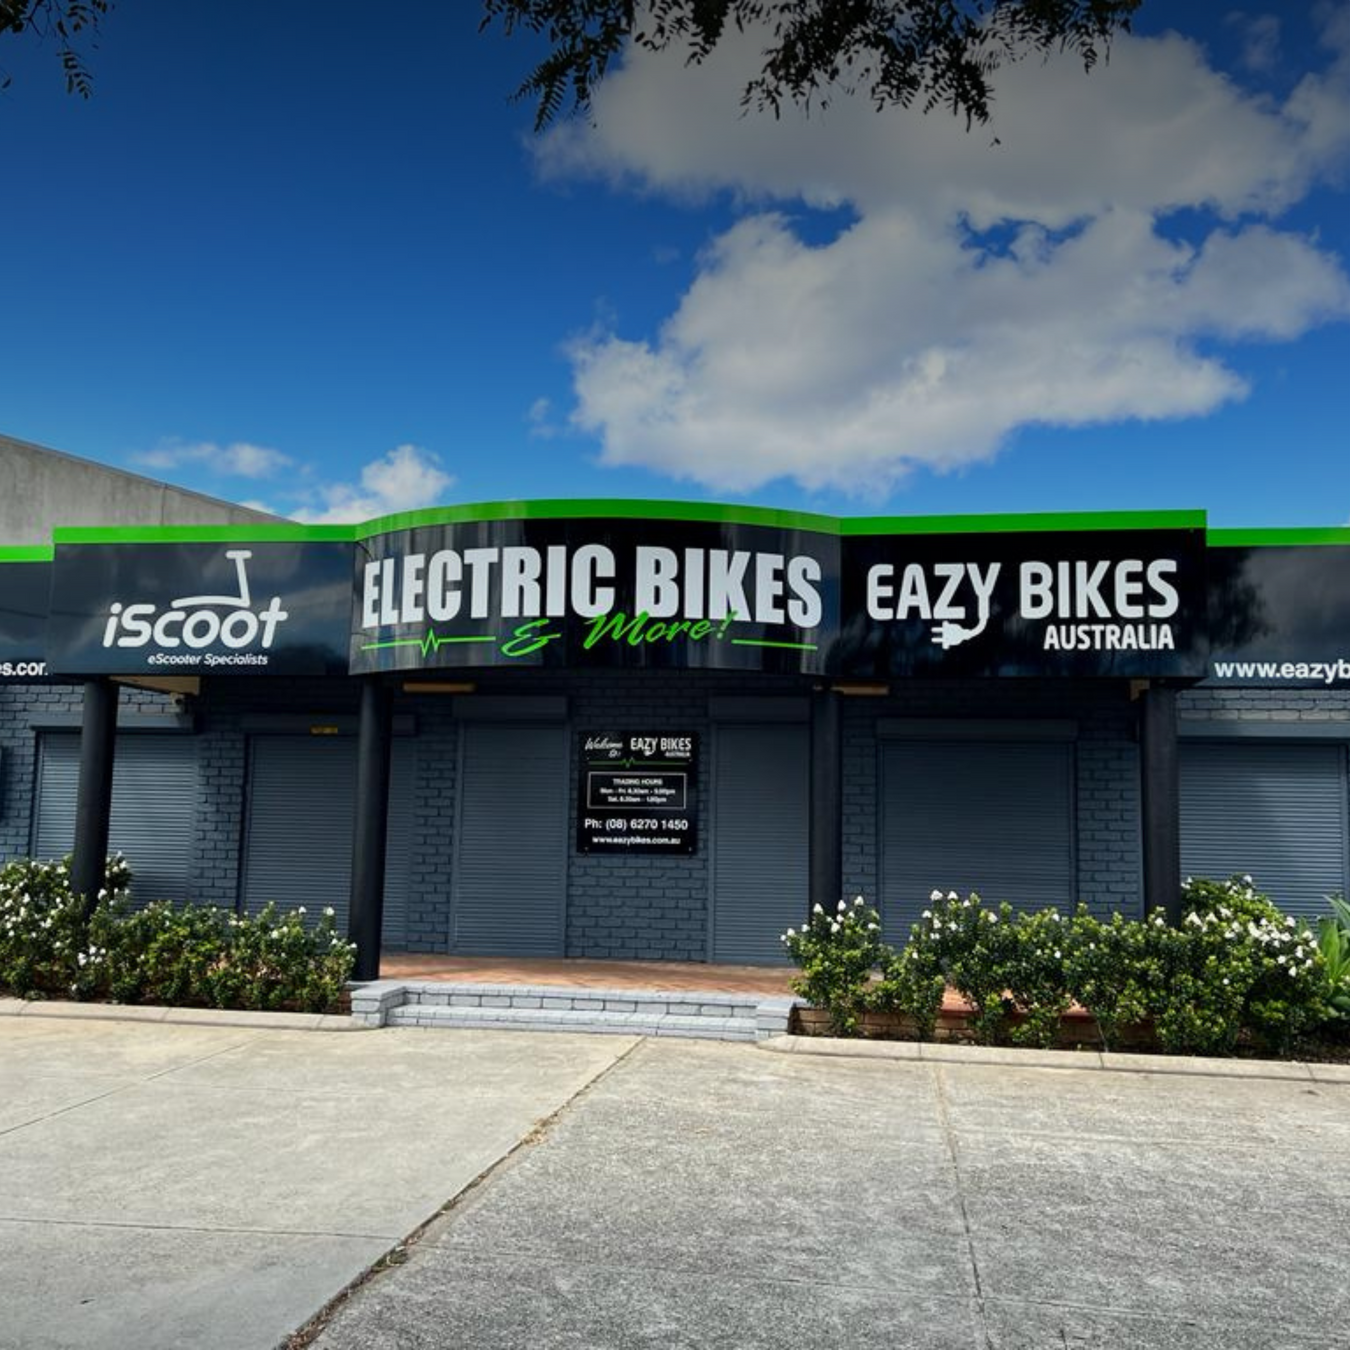 Electric Scooters Perth - Buy an E-Scooter in Perth